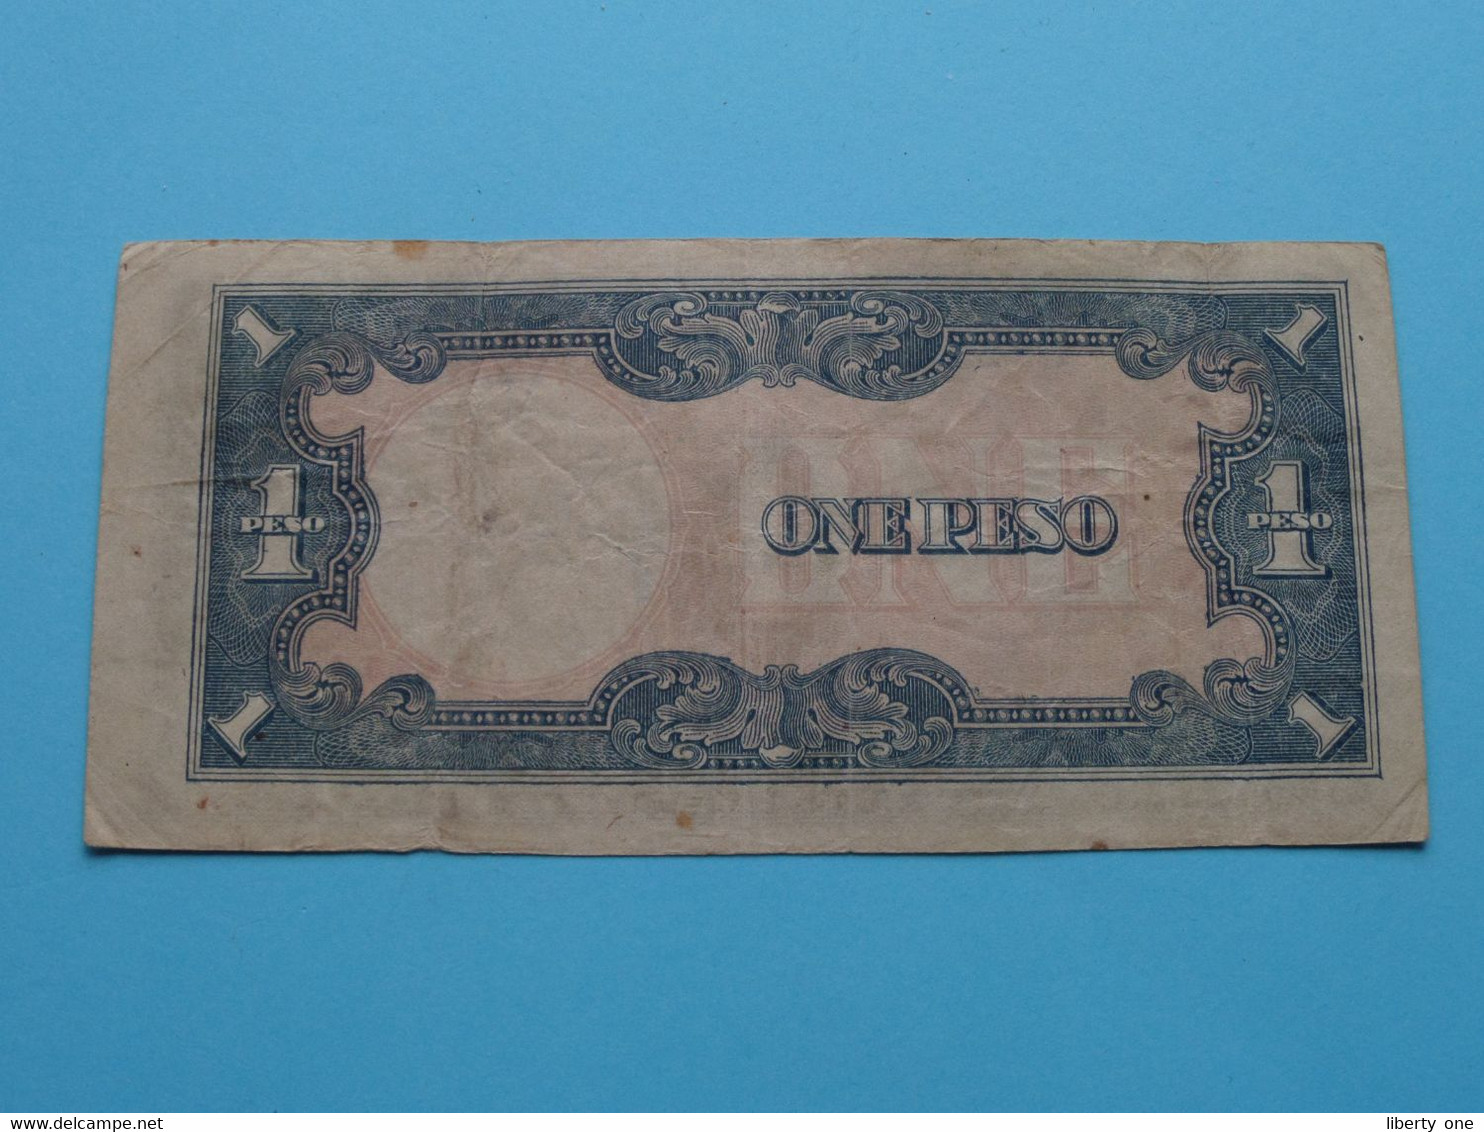 1 One Peso ( 64 - 0739434 ) The Japanese Government ( For Grade See SCAN ) Occupation / G ! - Philippinen